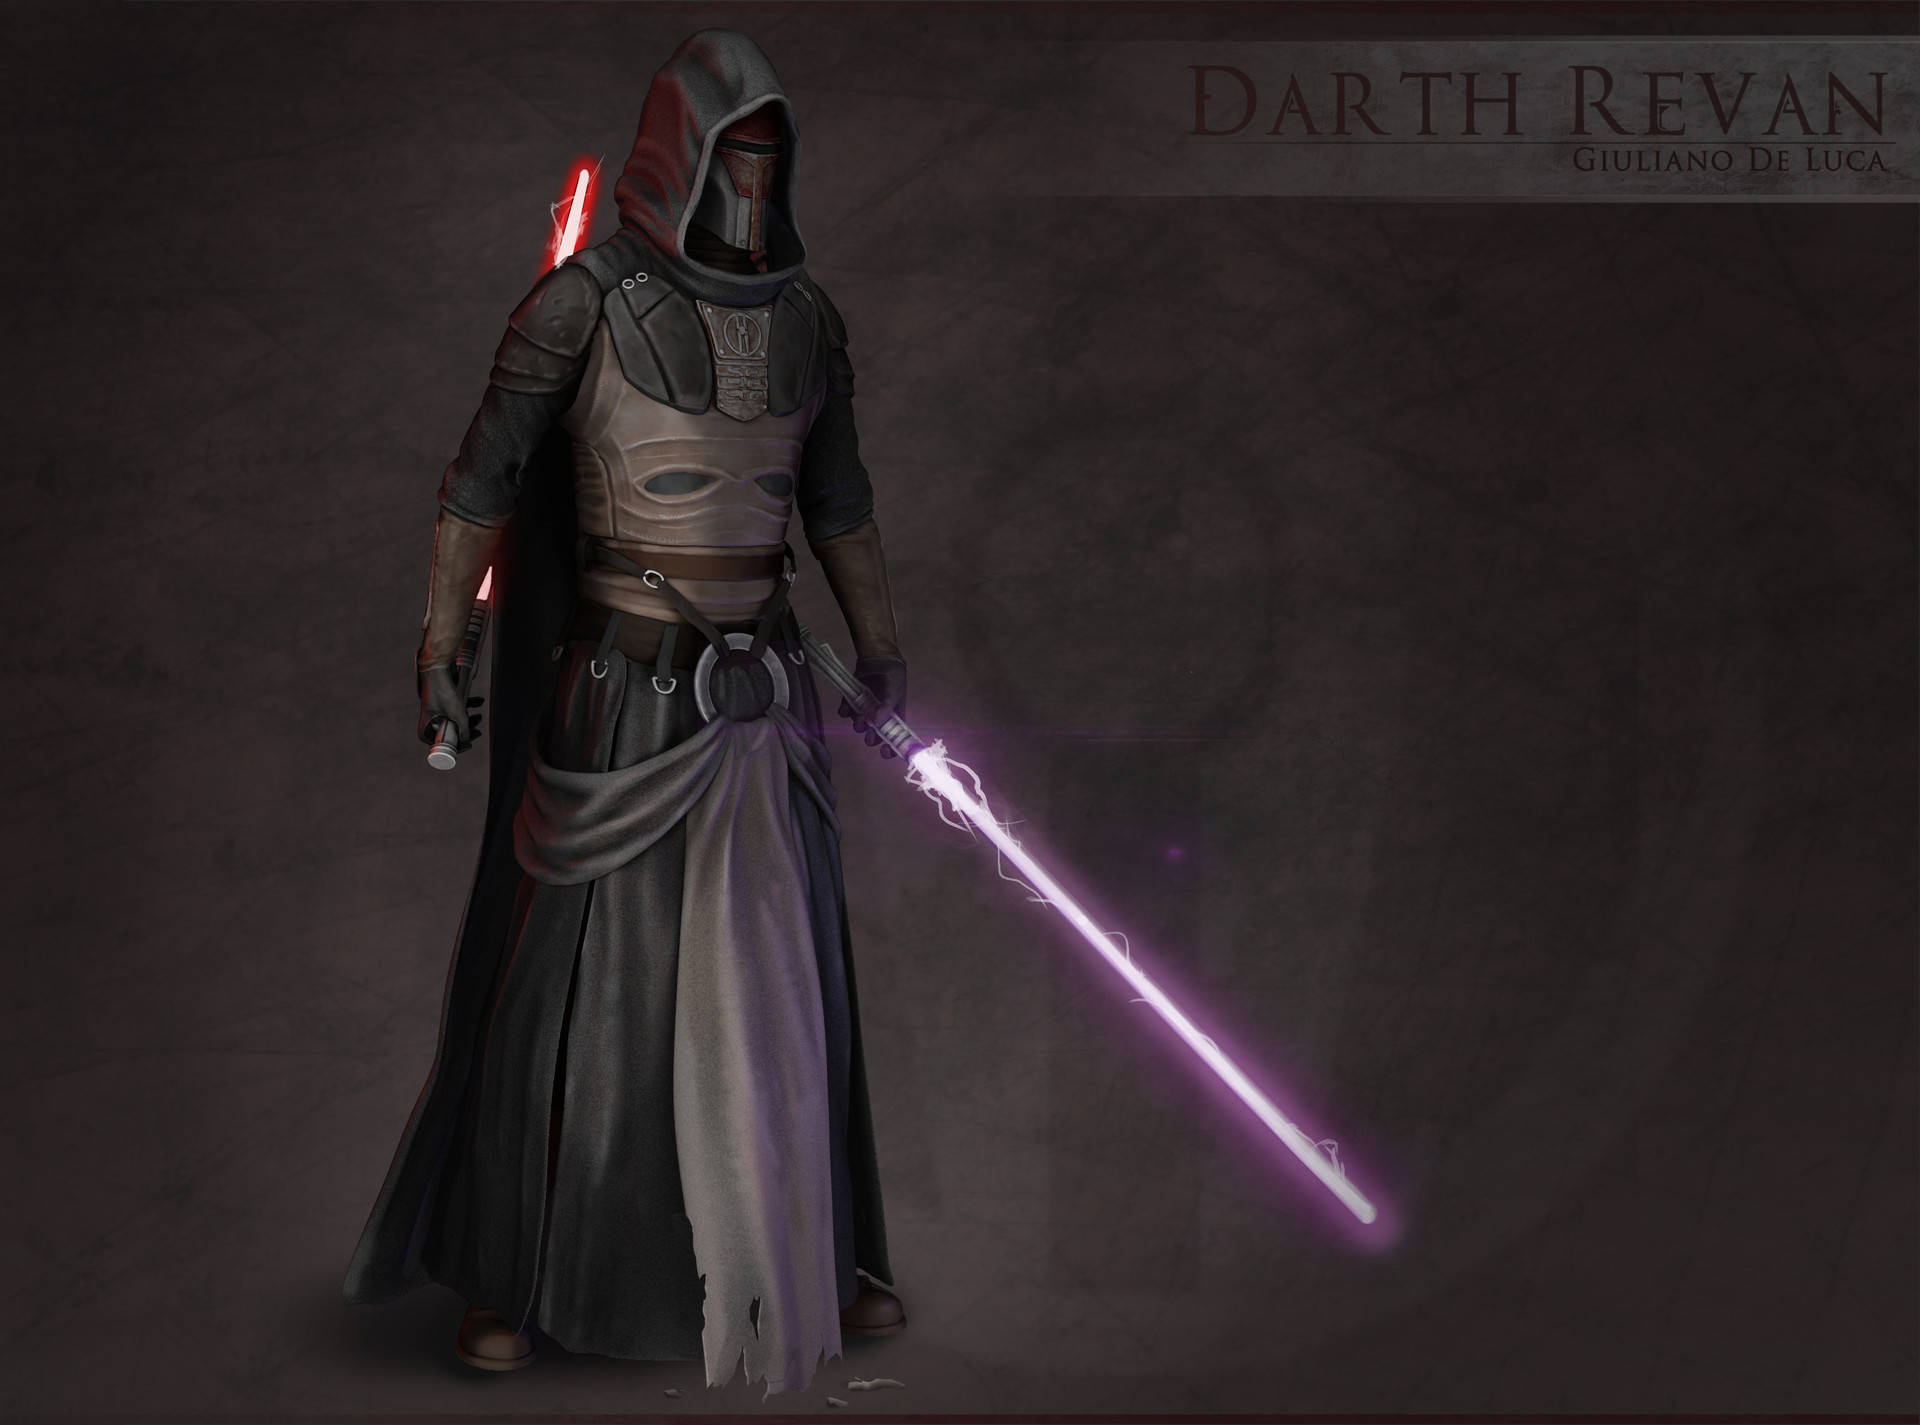 Darth Revan – Star Wars’ Sith Lord Mastering The Dark Side Of The Force